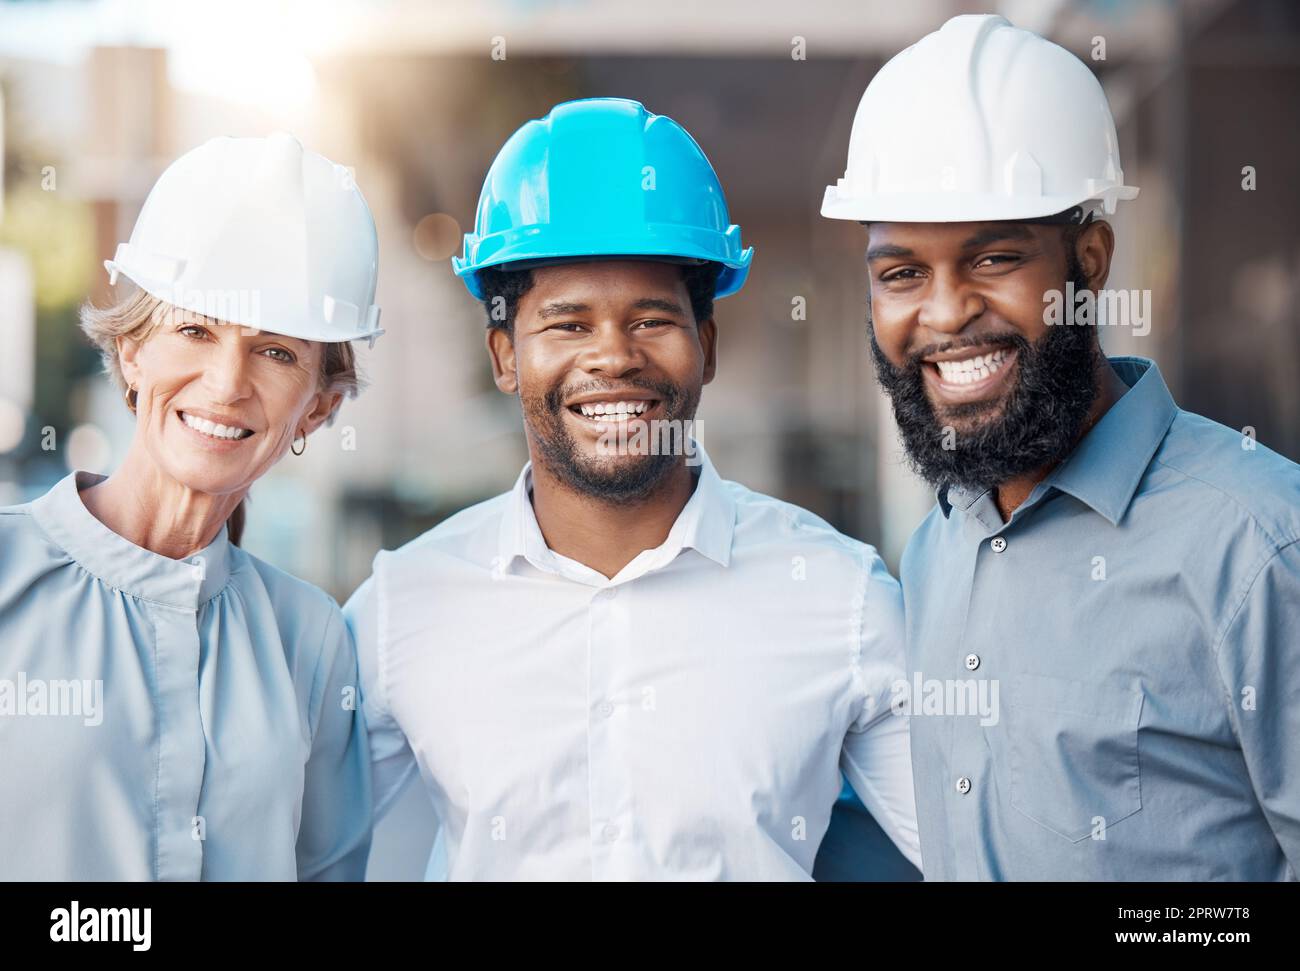 Architect portrait, work diversity and construction workers working on building project together, happy with architecture and industrial team in the city. Engineer group with smile for design job Stock Photo